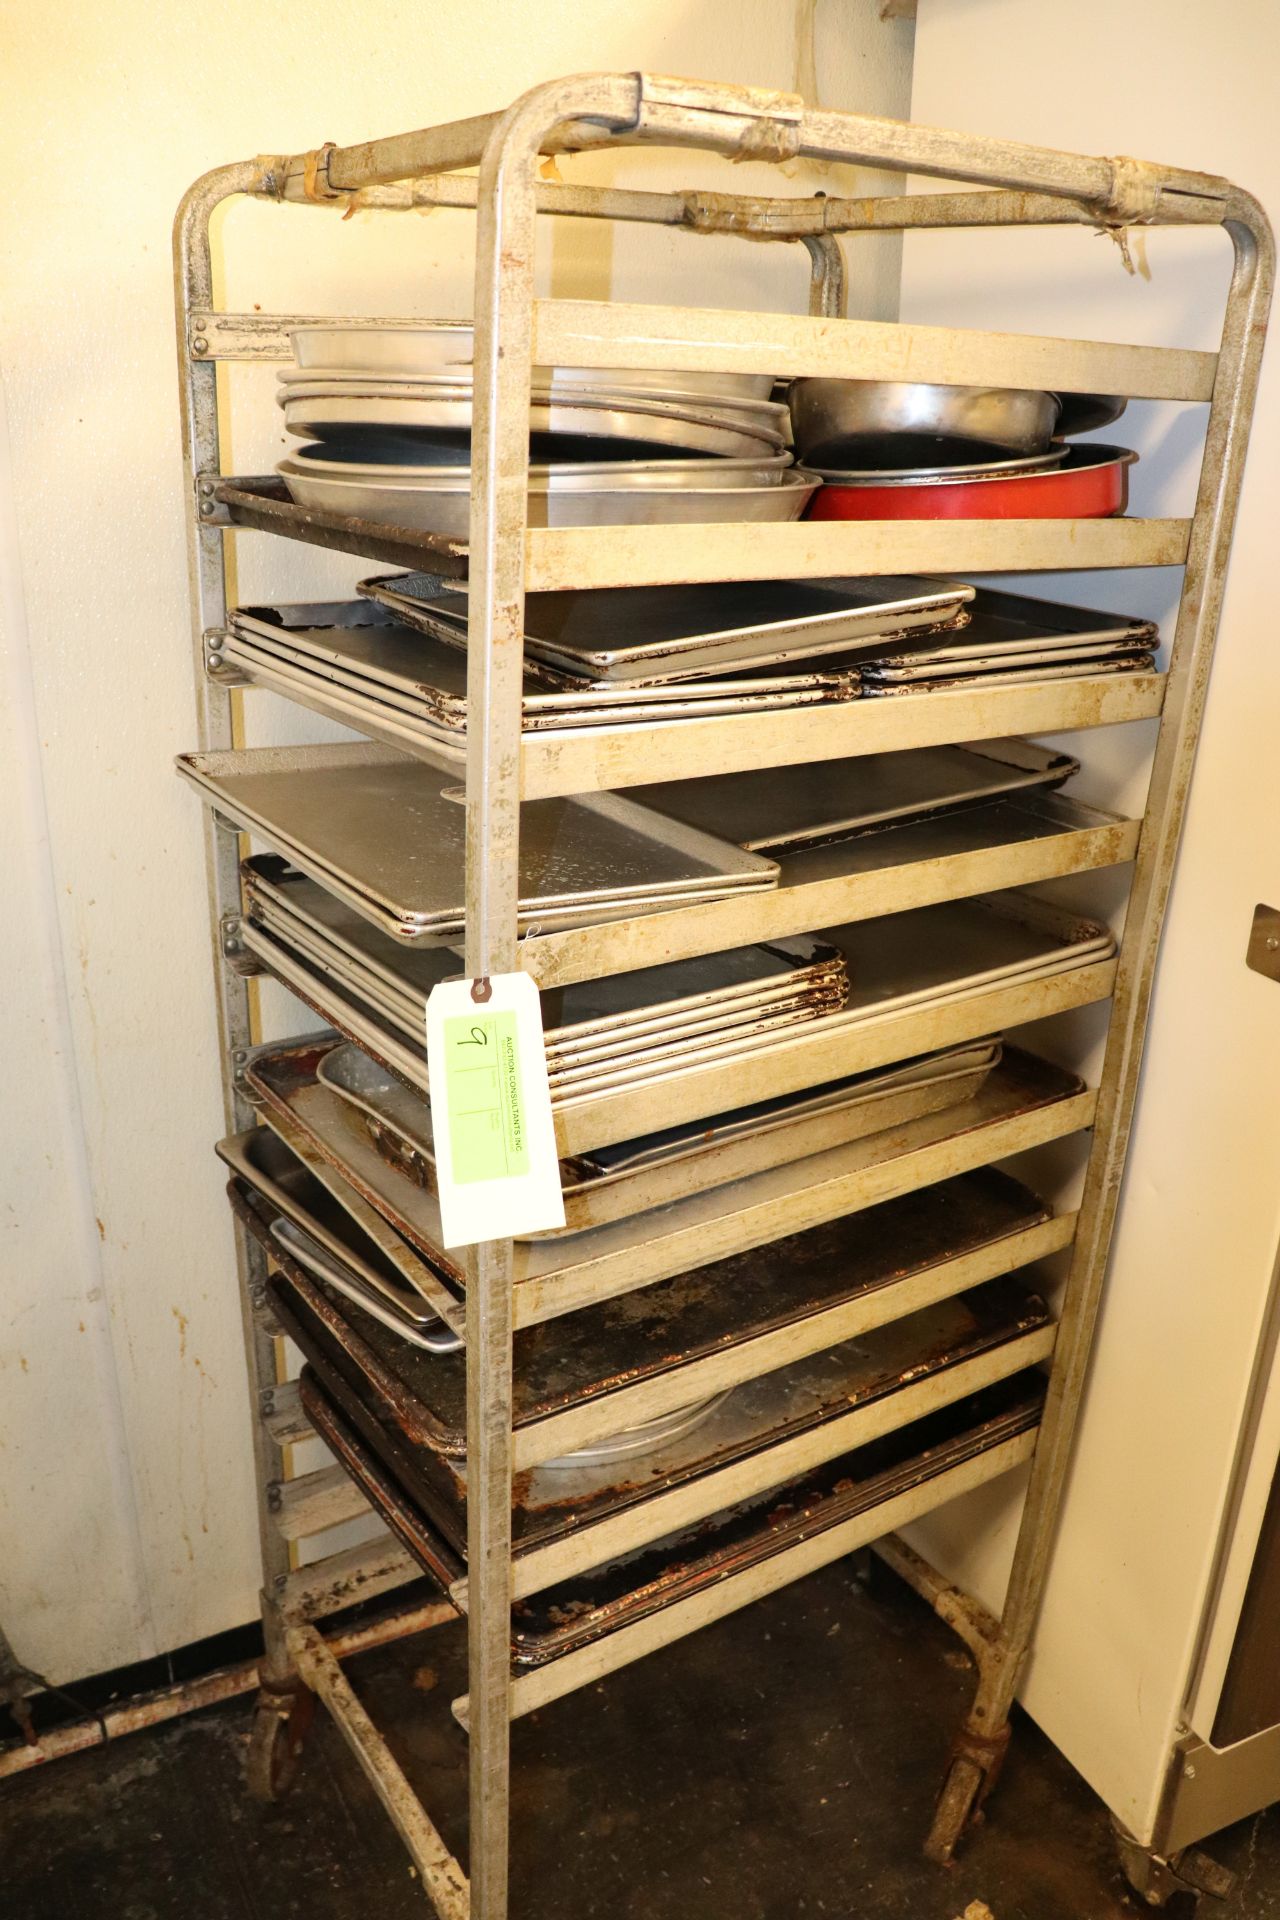 Tray rack on casters and sheet pan rack with contents